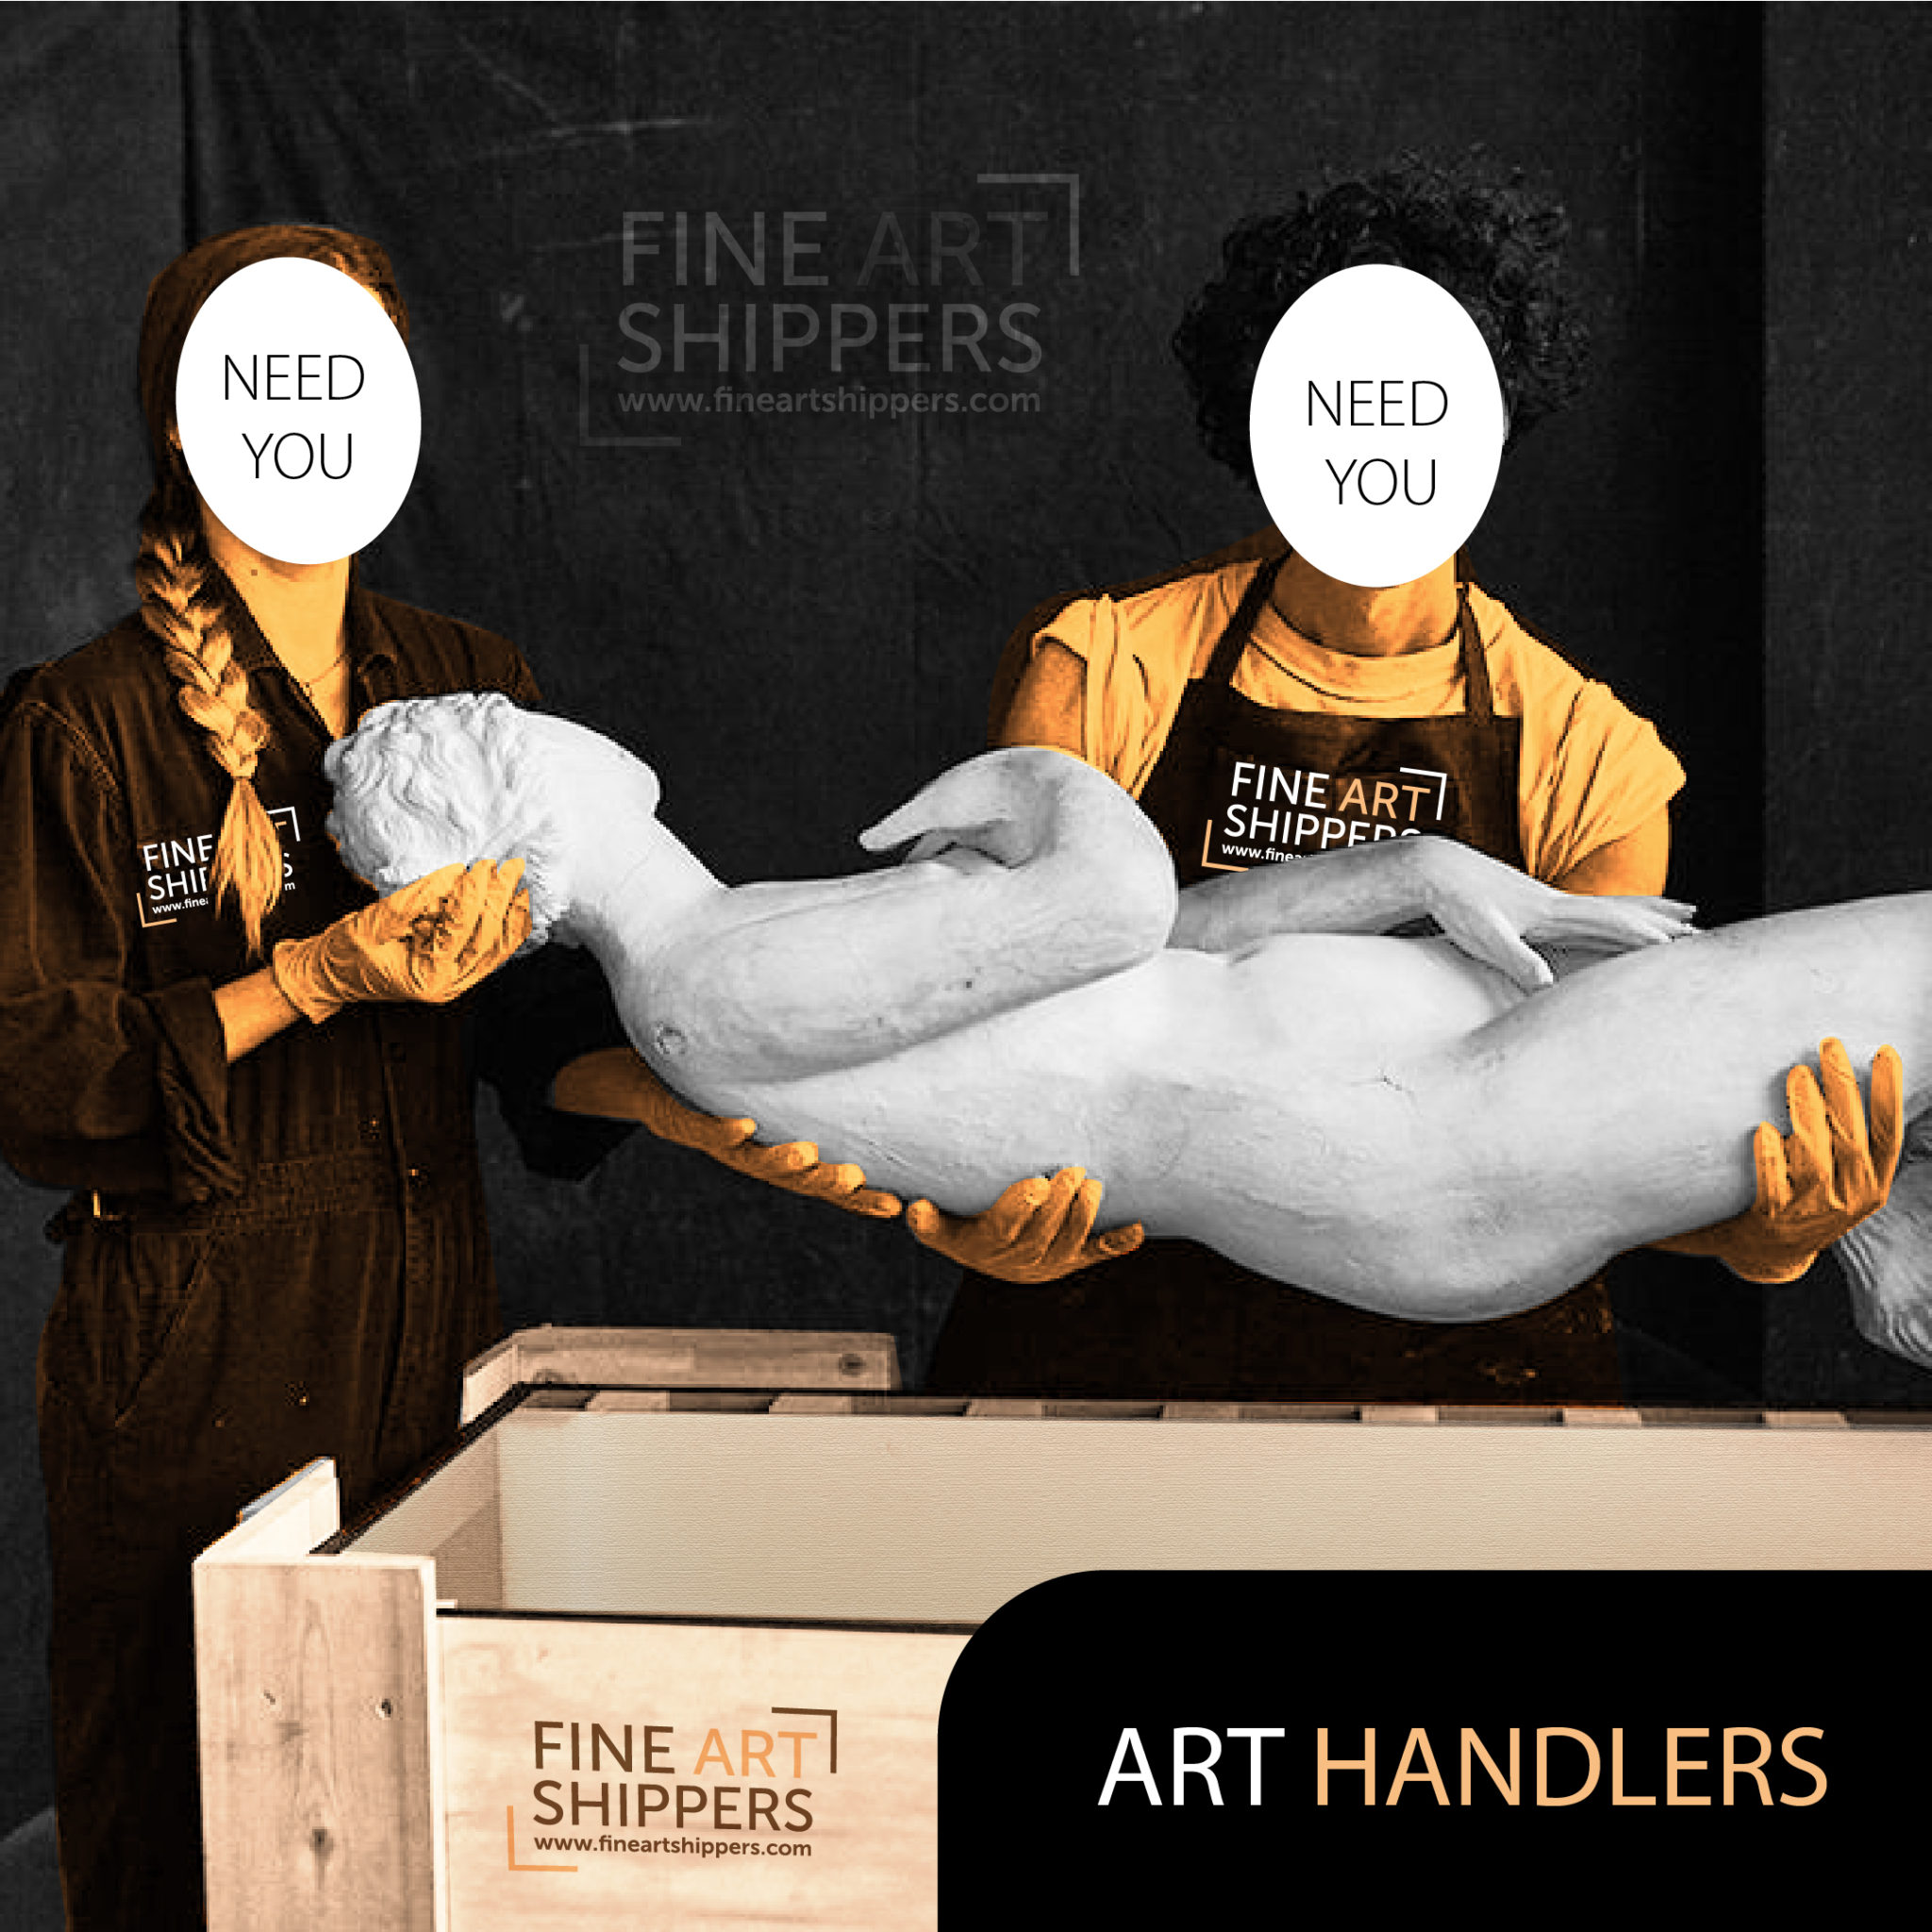 Fine Art Shippers Is Looking for Dedicated Art Handlers